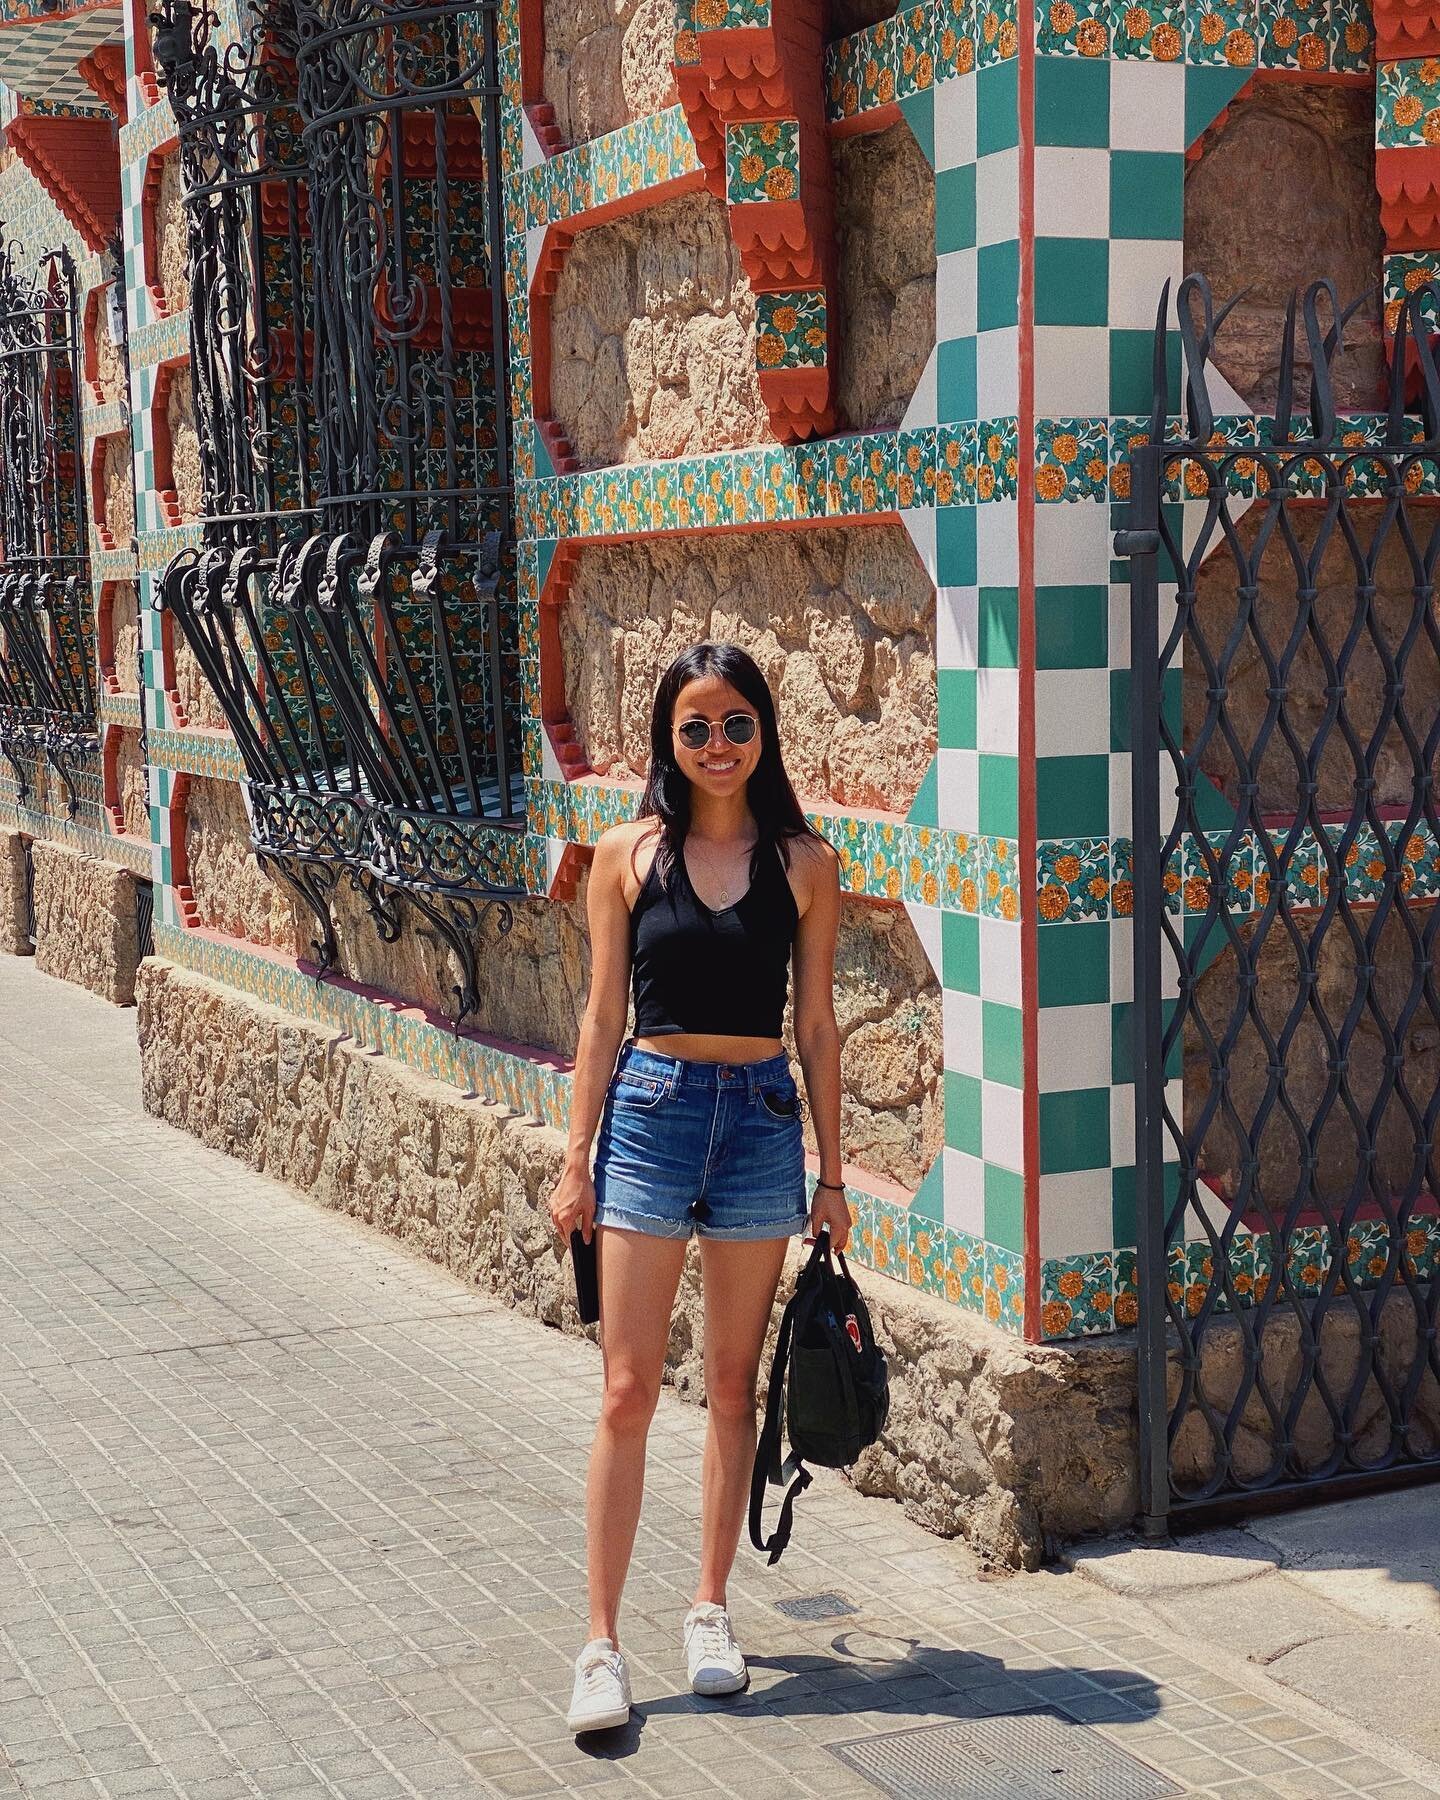 📍currently not here! currently still wearing a trench coat! #britishproblems 😭  #barcelona #lastsummer #europe #casavicens #gaudi #summer #heremag #travelaway #architecture